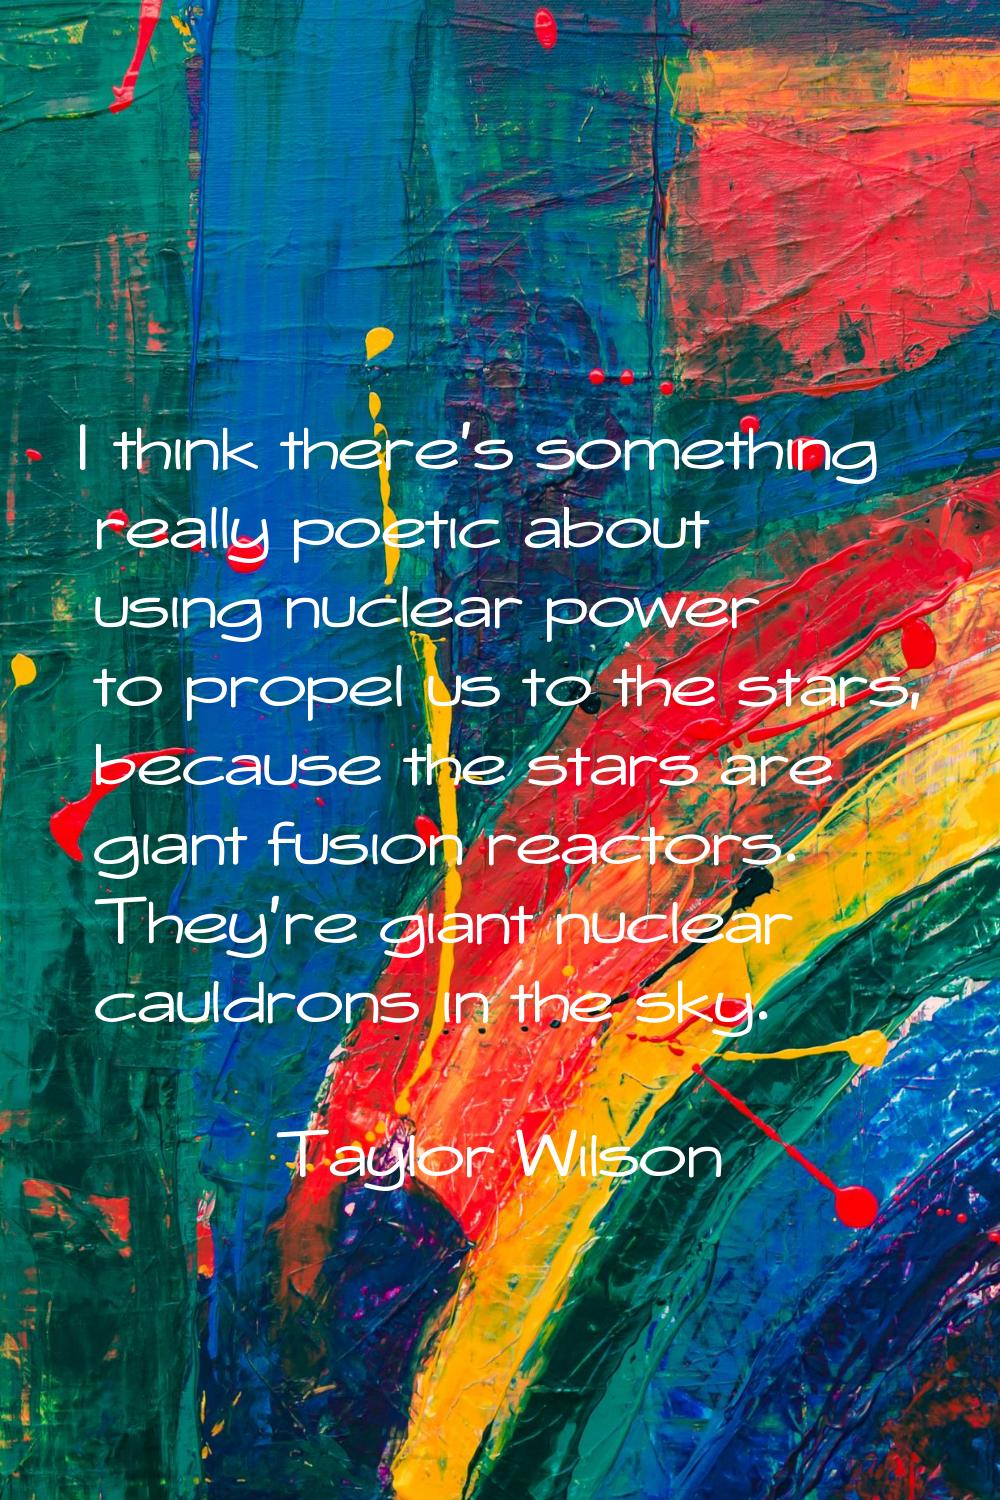 I think there's something really poetic about using nuclear power to propel us to the stars, becaus